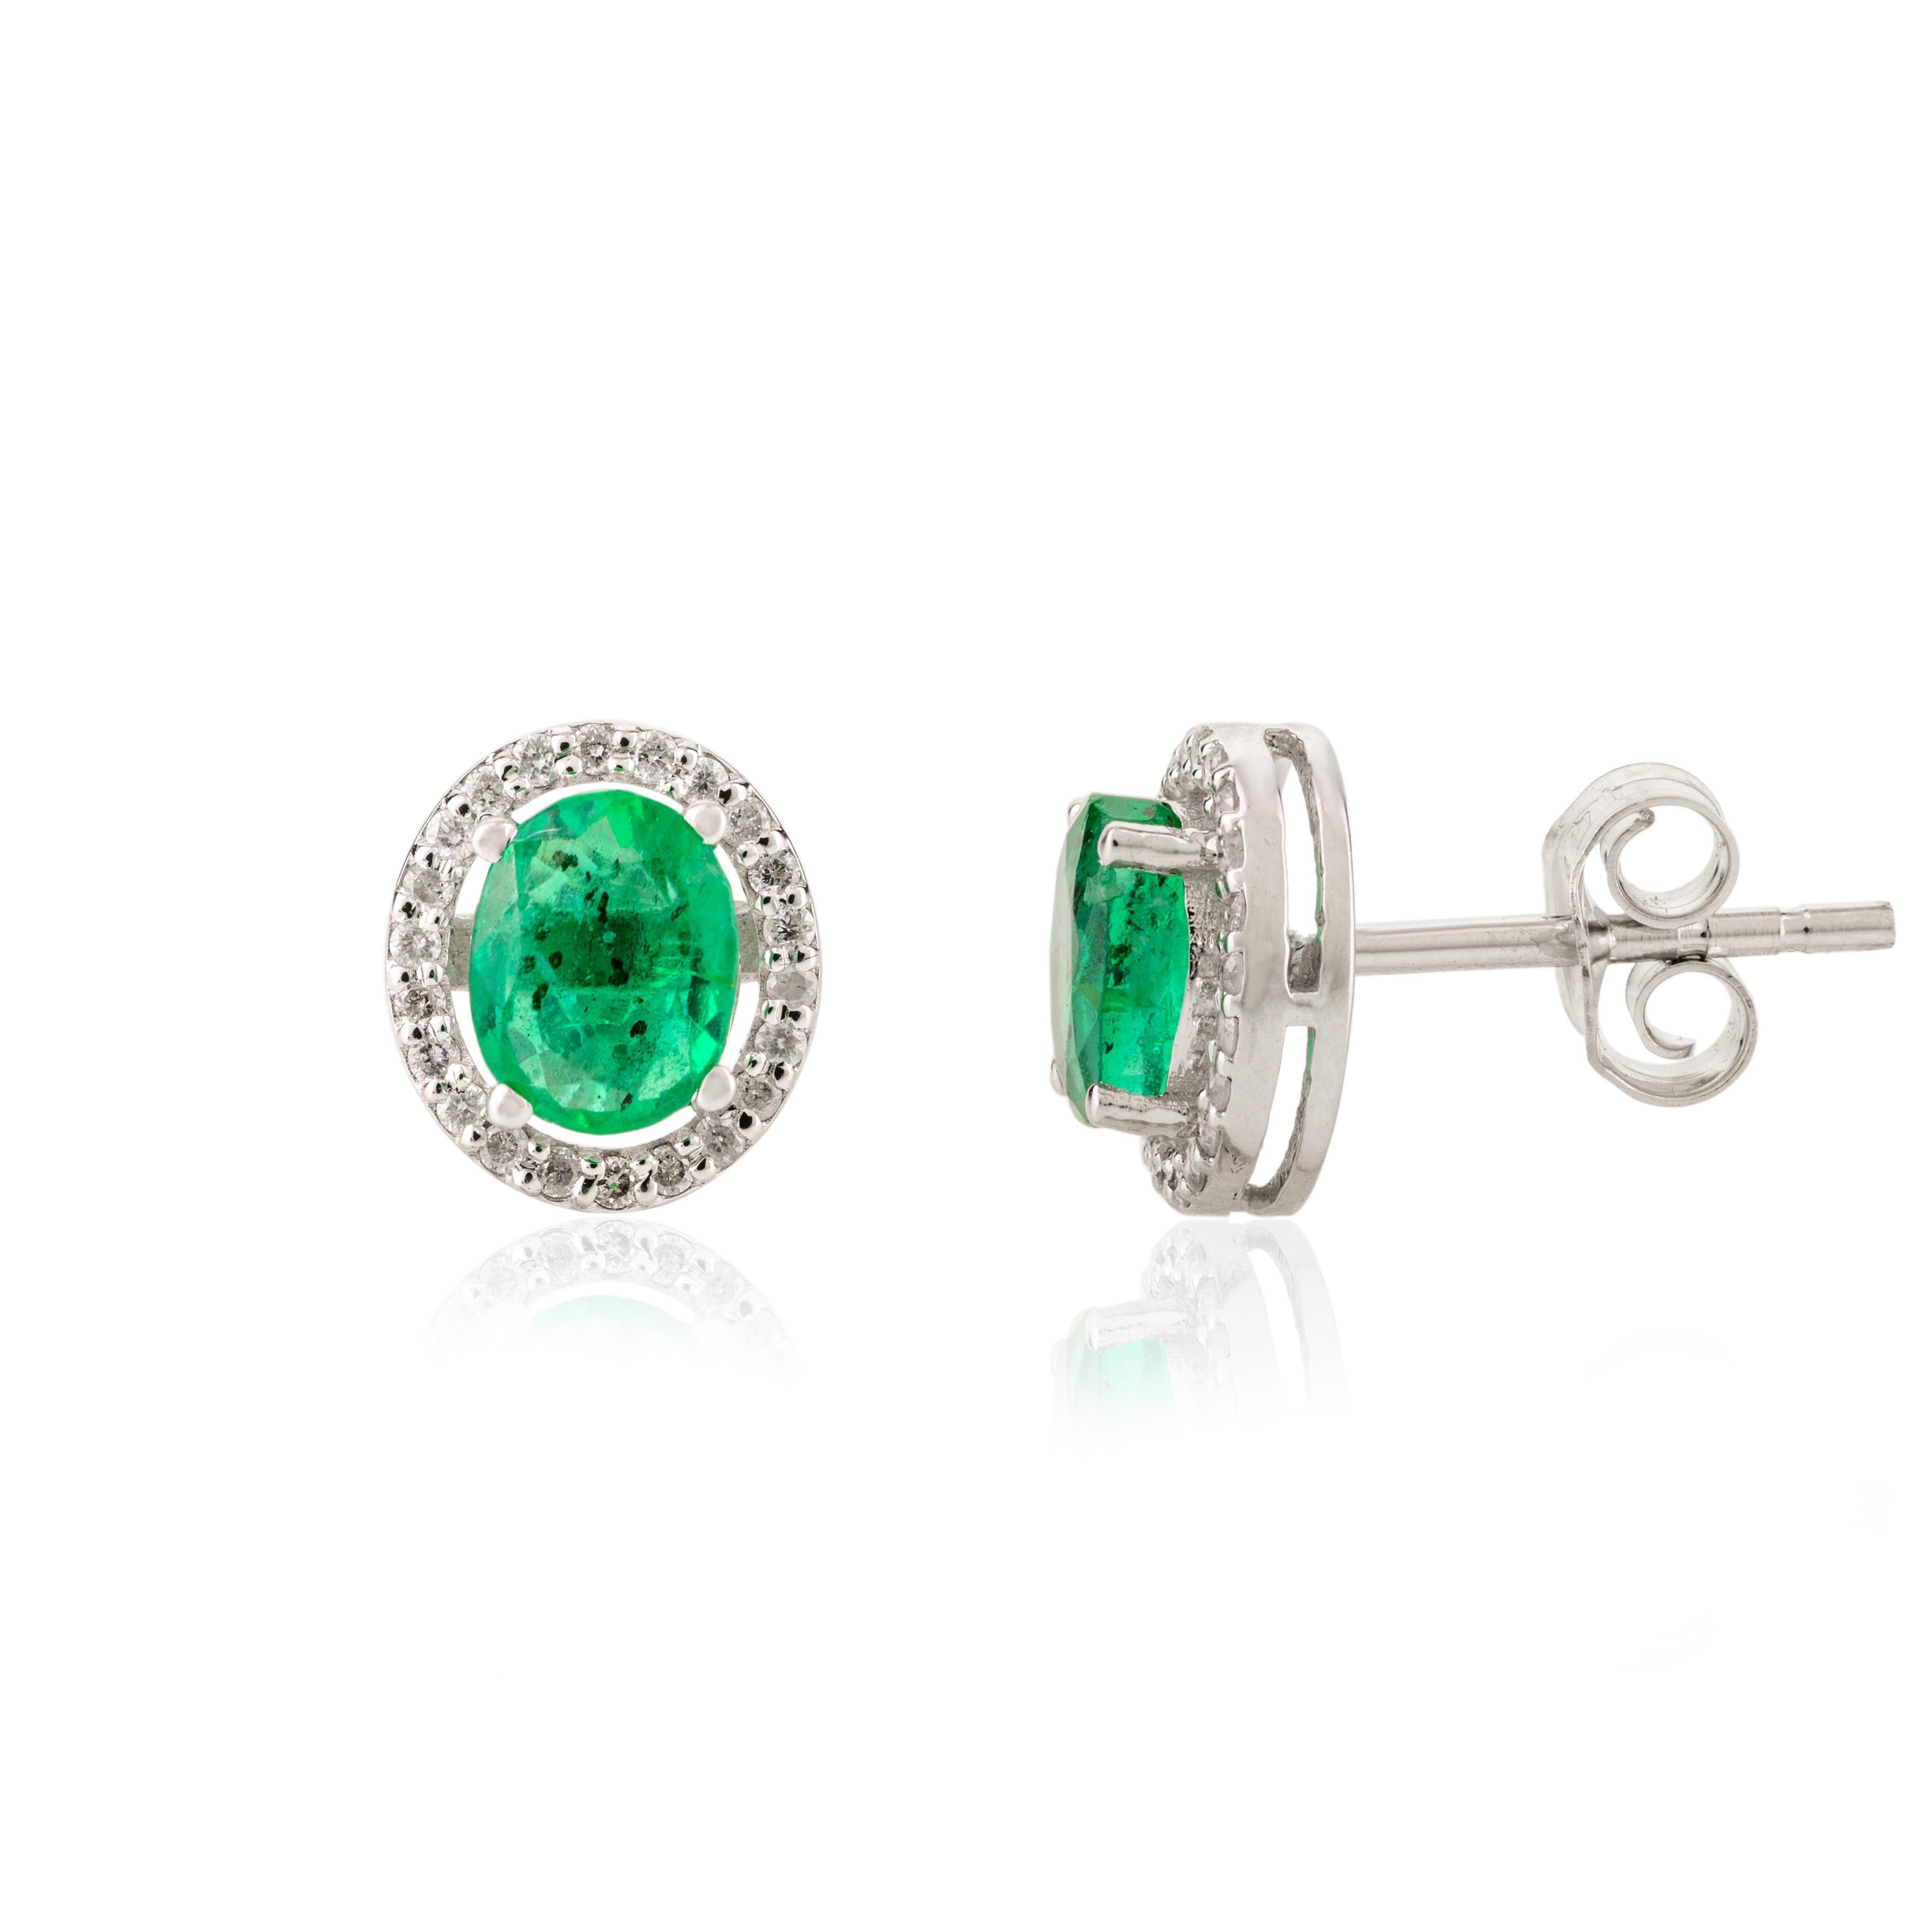 Modern Natural Emerald Diamond Halo Oval Stud Earrings in 14k White Gold Gift for Mom For Sale